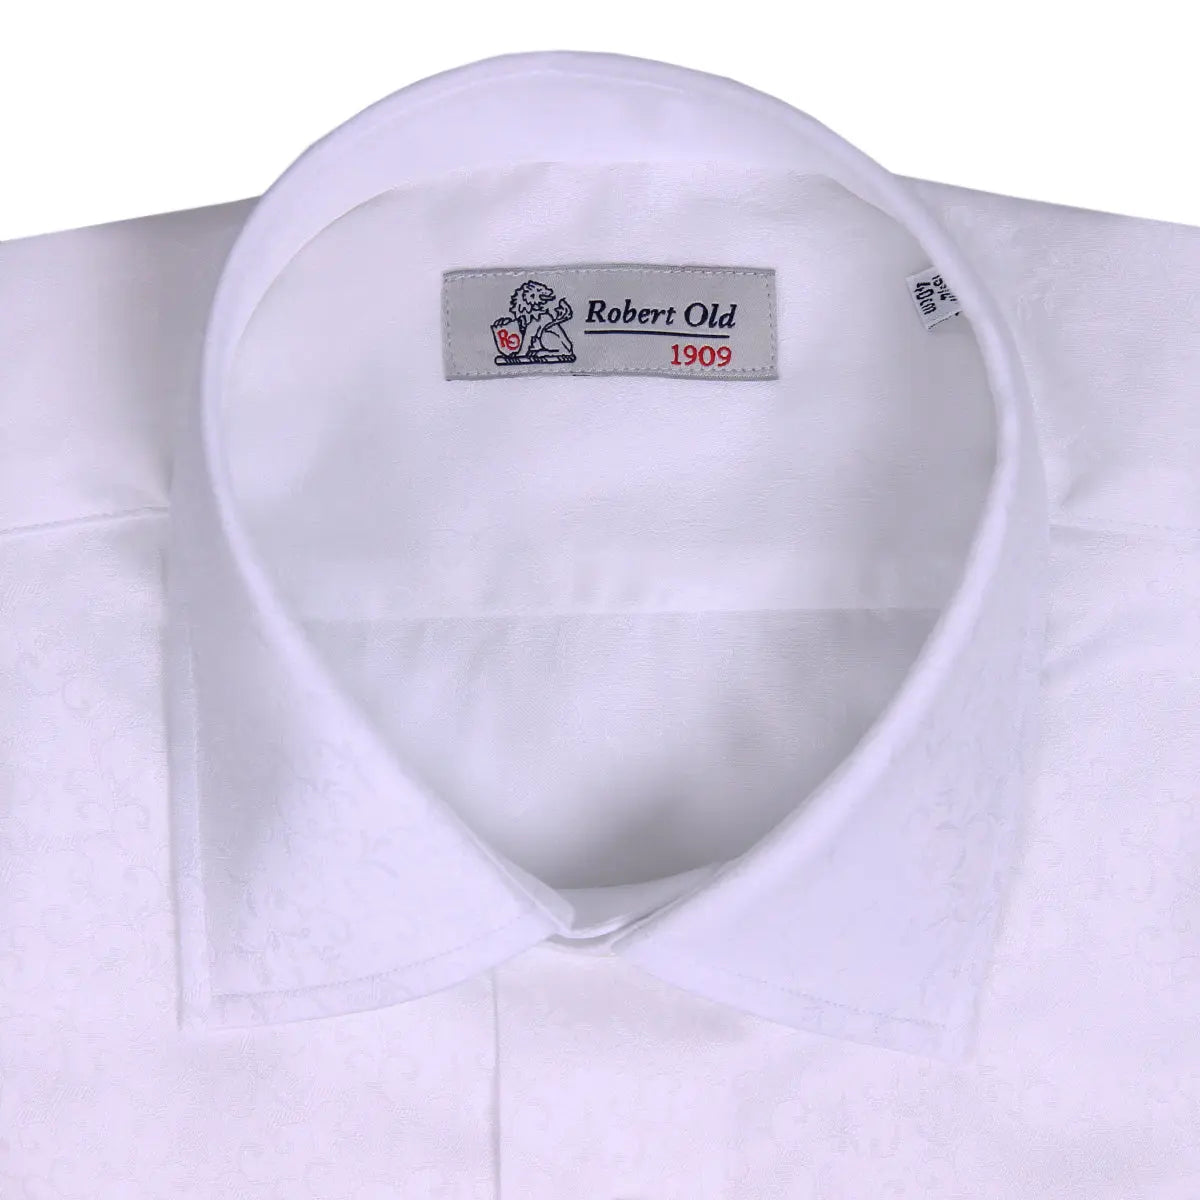 White Patterned 2Ply Swiss Cotton Dobby Shirt  Robert Old   